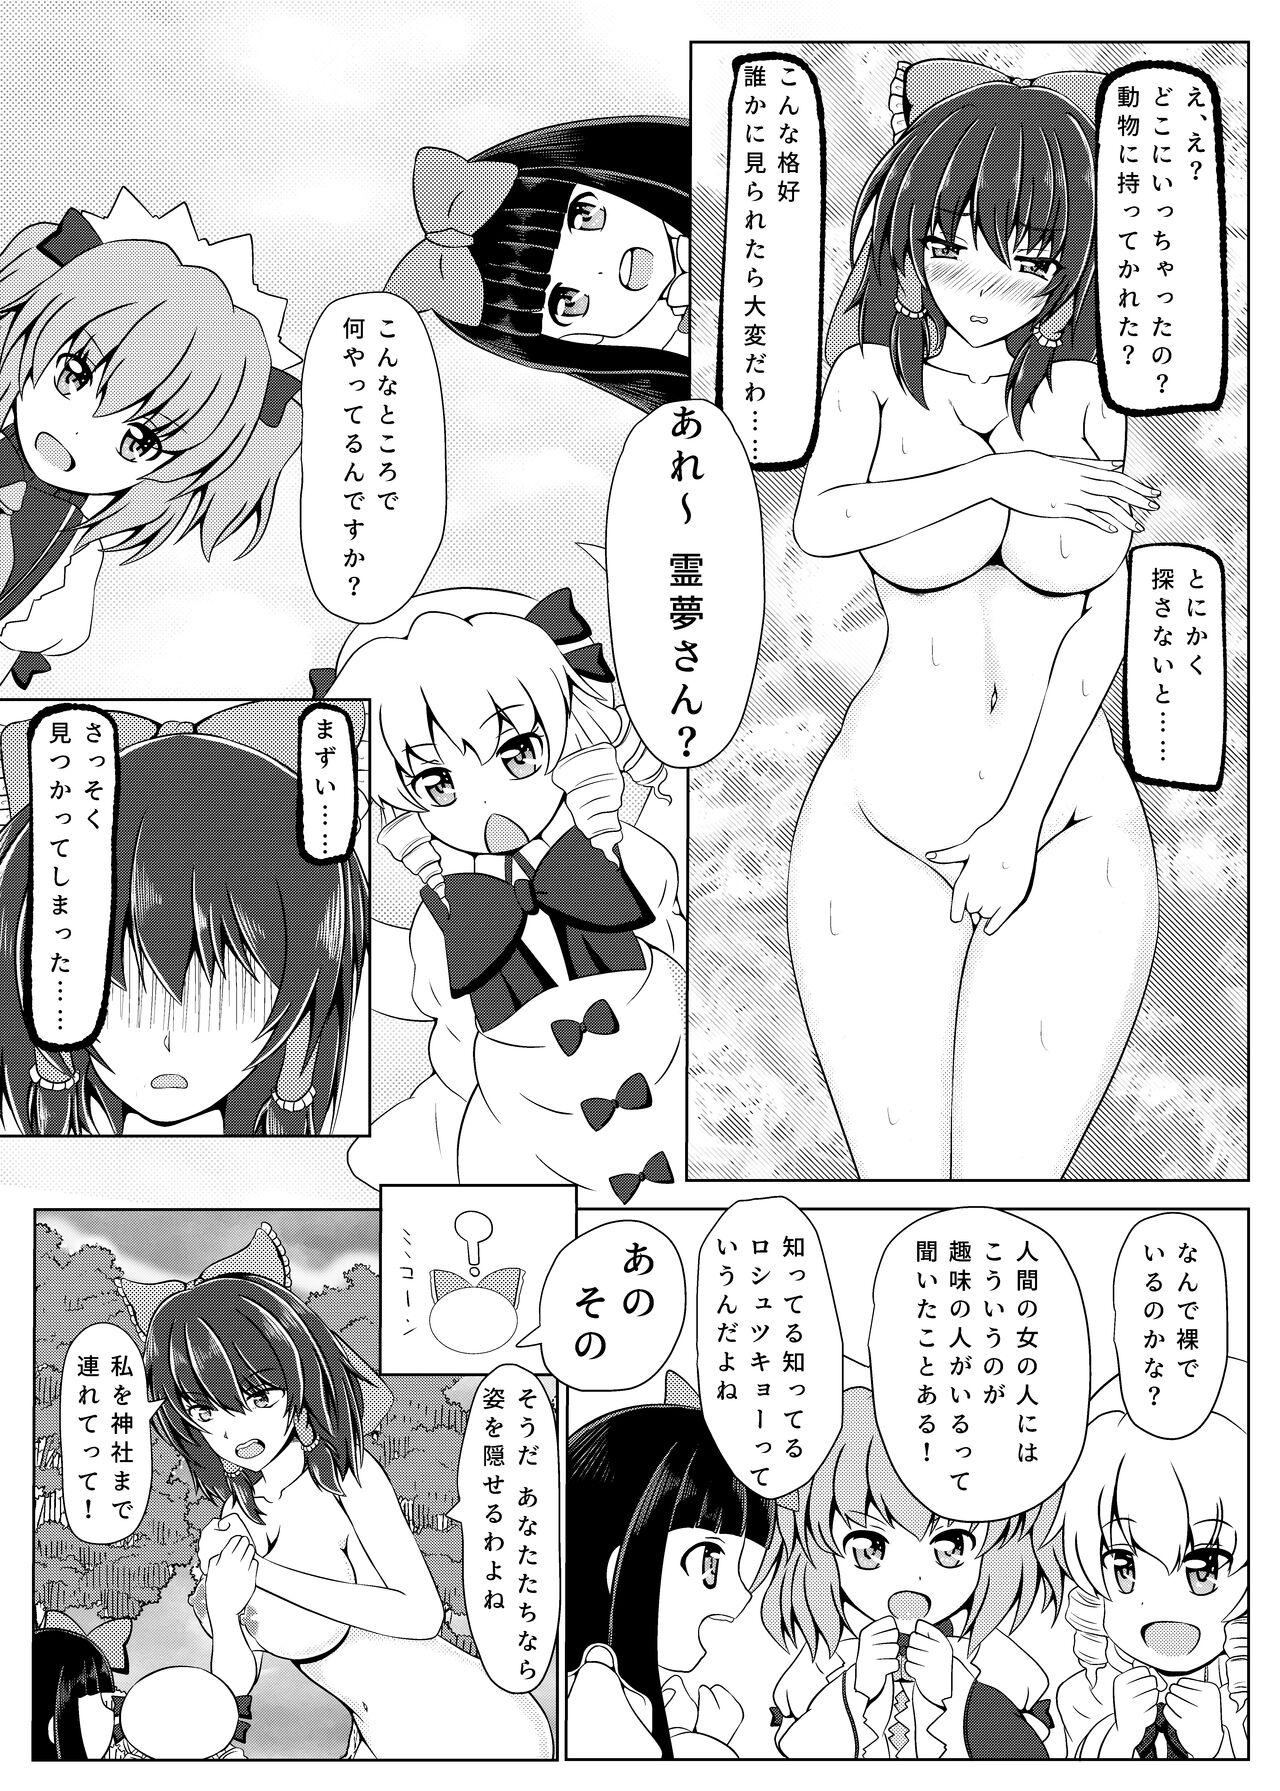 Mexican 霊夢さんと遊ぼう!! - Touhou project Bhabi - Page 4